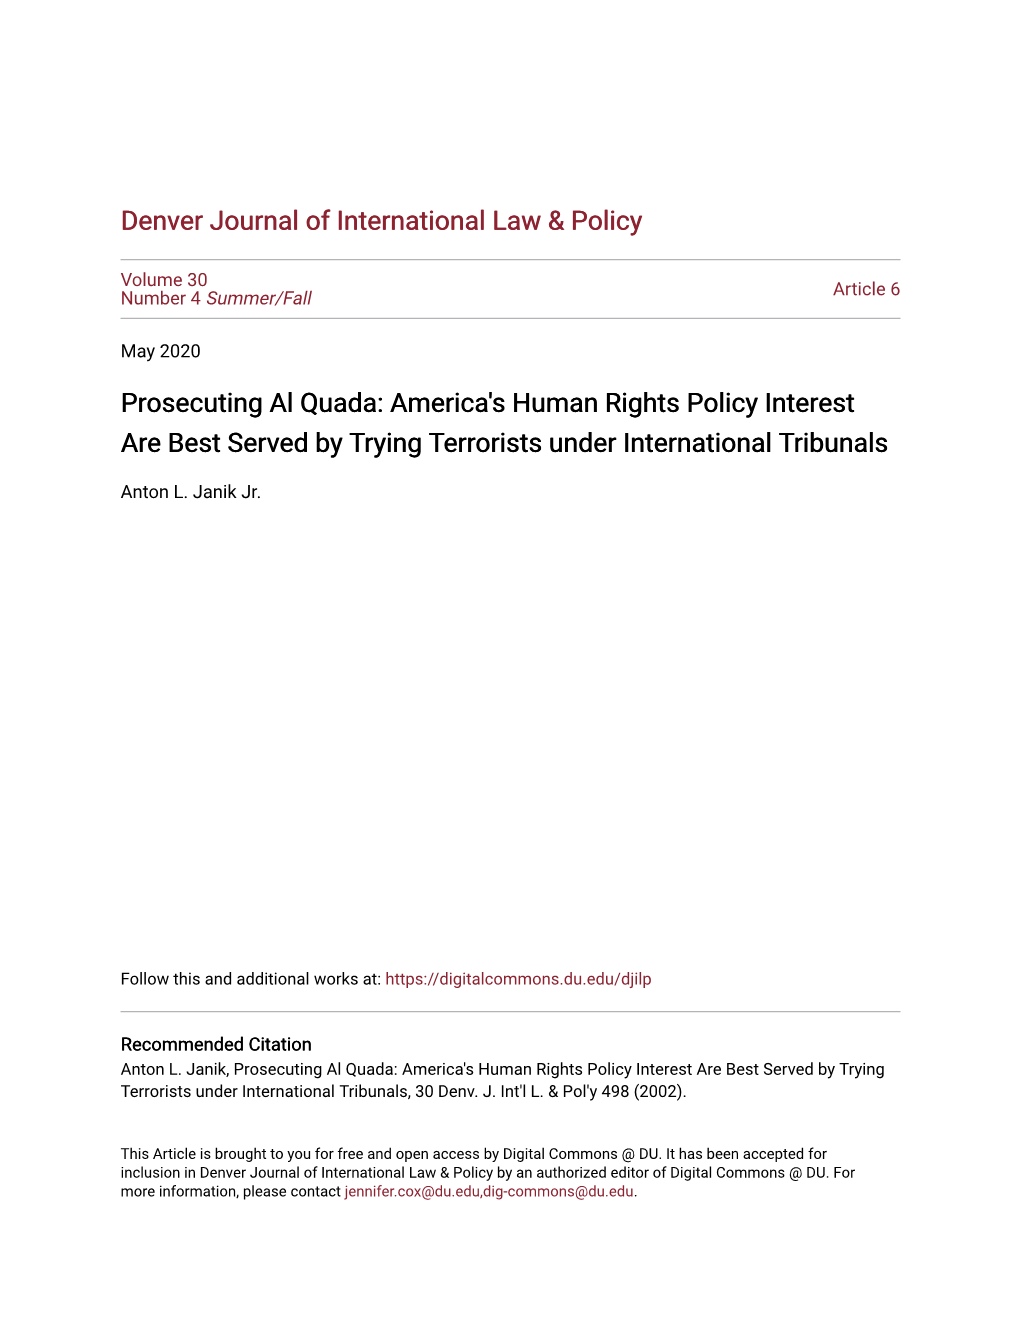 Prosecuting Al Quada: America's Human Rights Policy Interest Are Best Served by Trying Terrorists Under International Tribunals